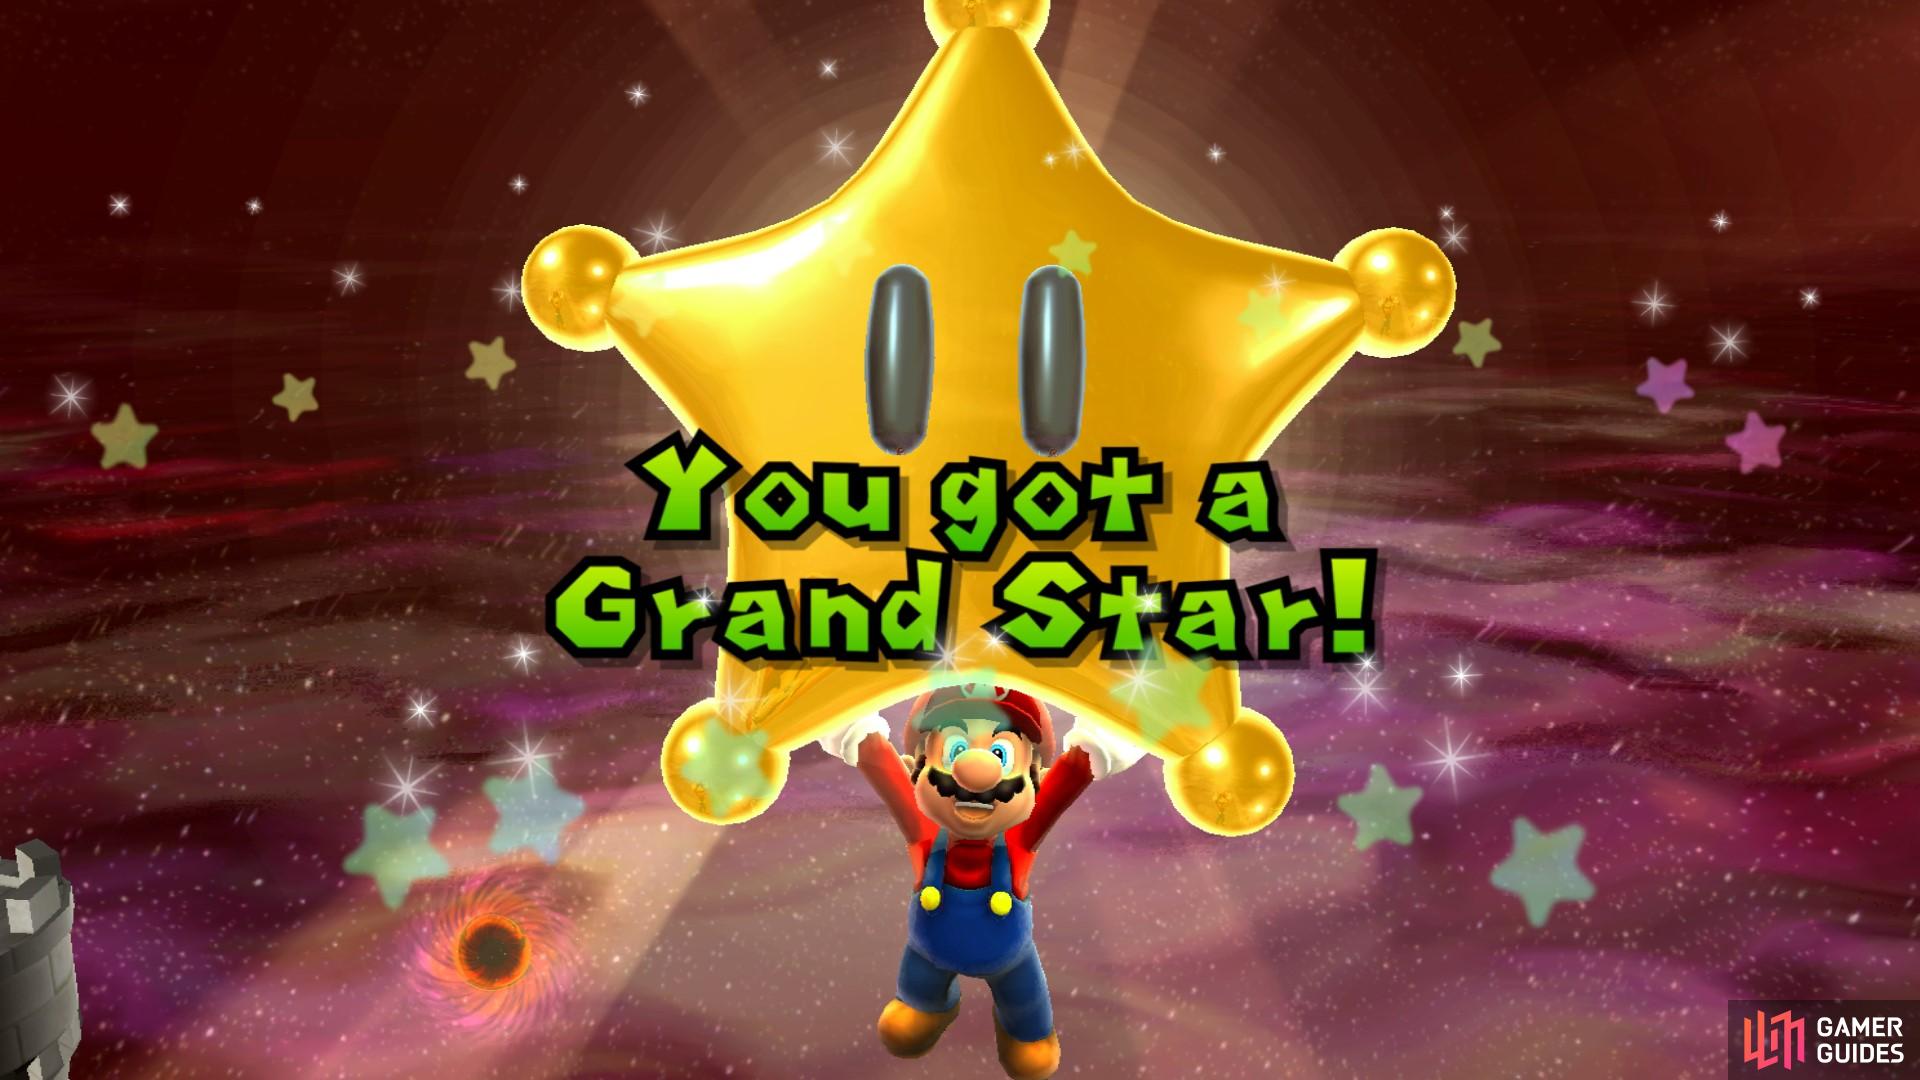 Defeat Bowser to earn a Grand Star!